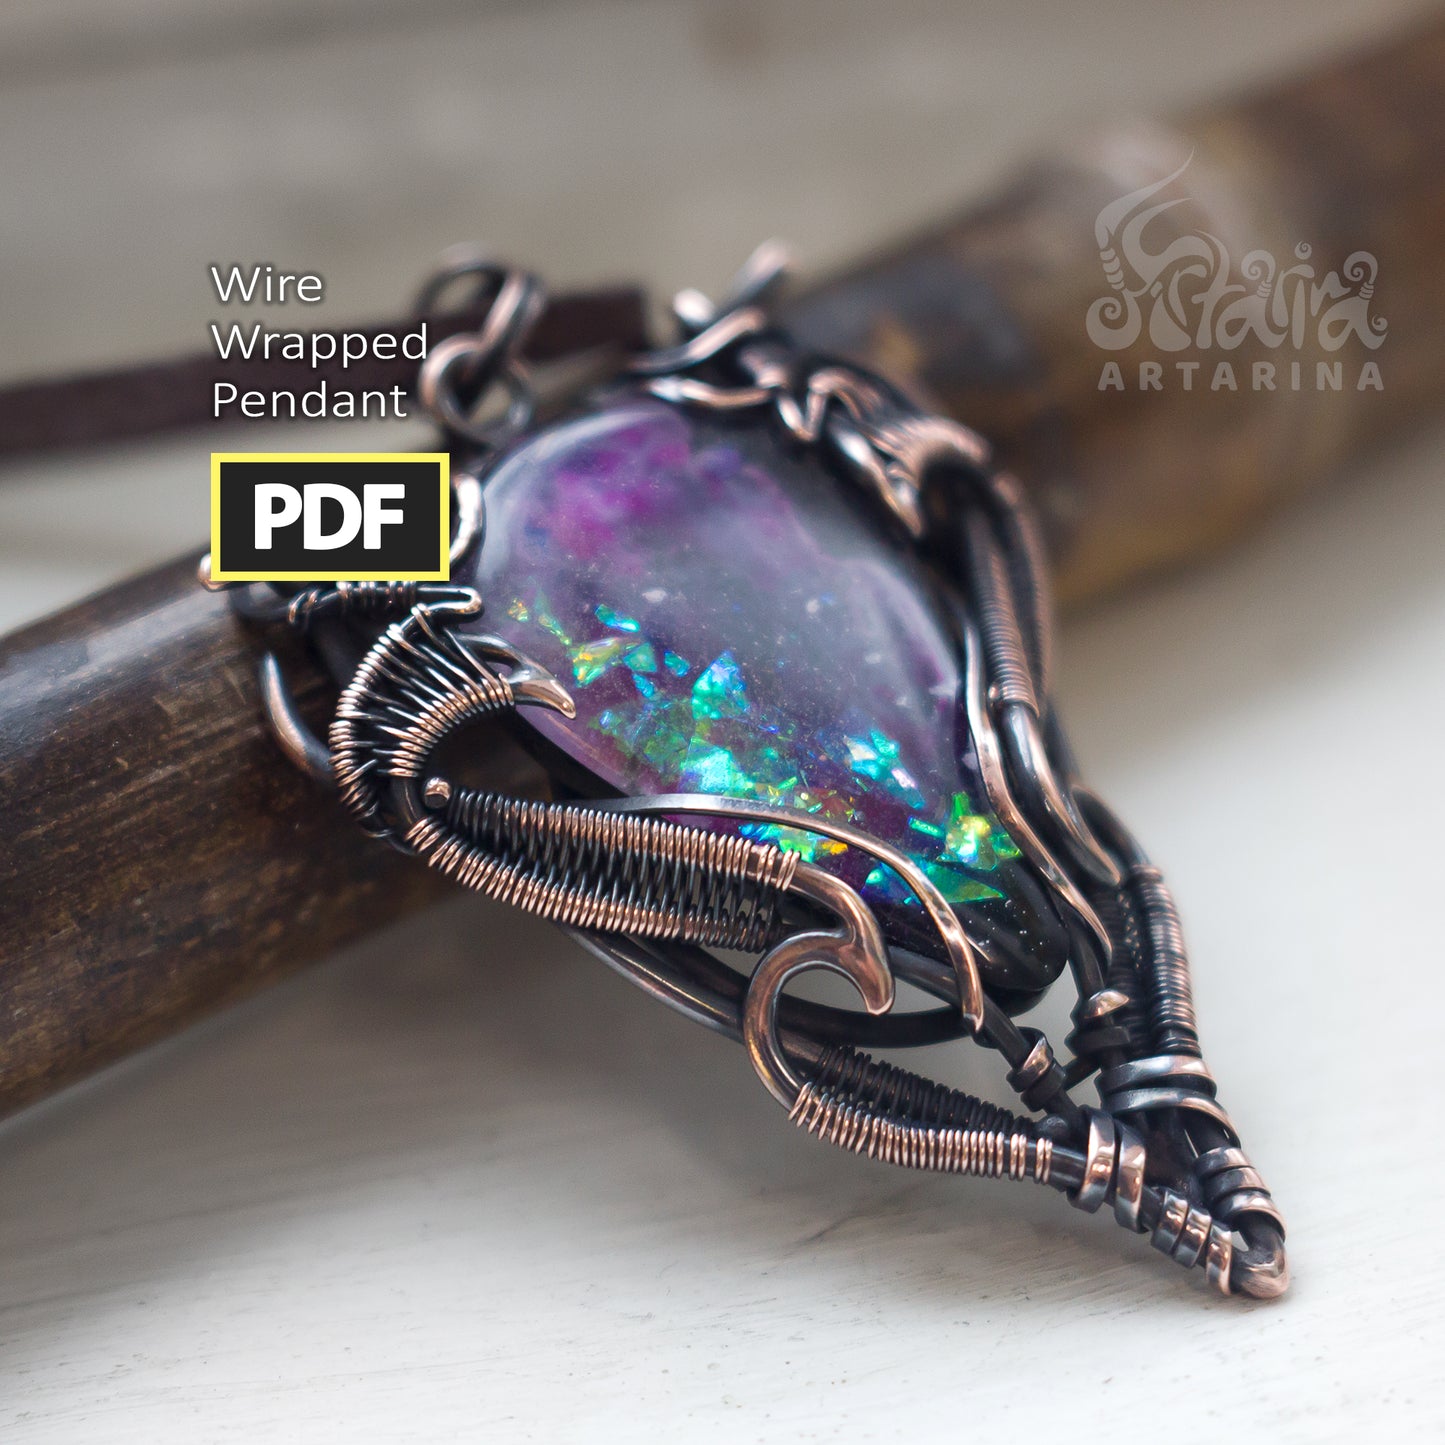 Advanced wire wrapping Artarina tutorial | Digital PDF step by step wire pendant creation